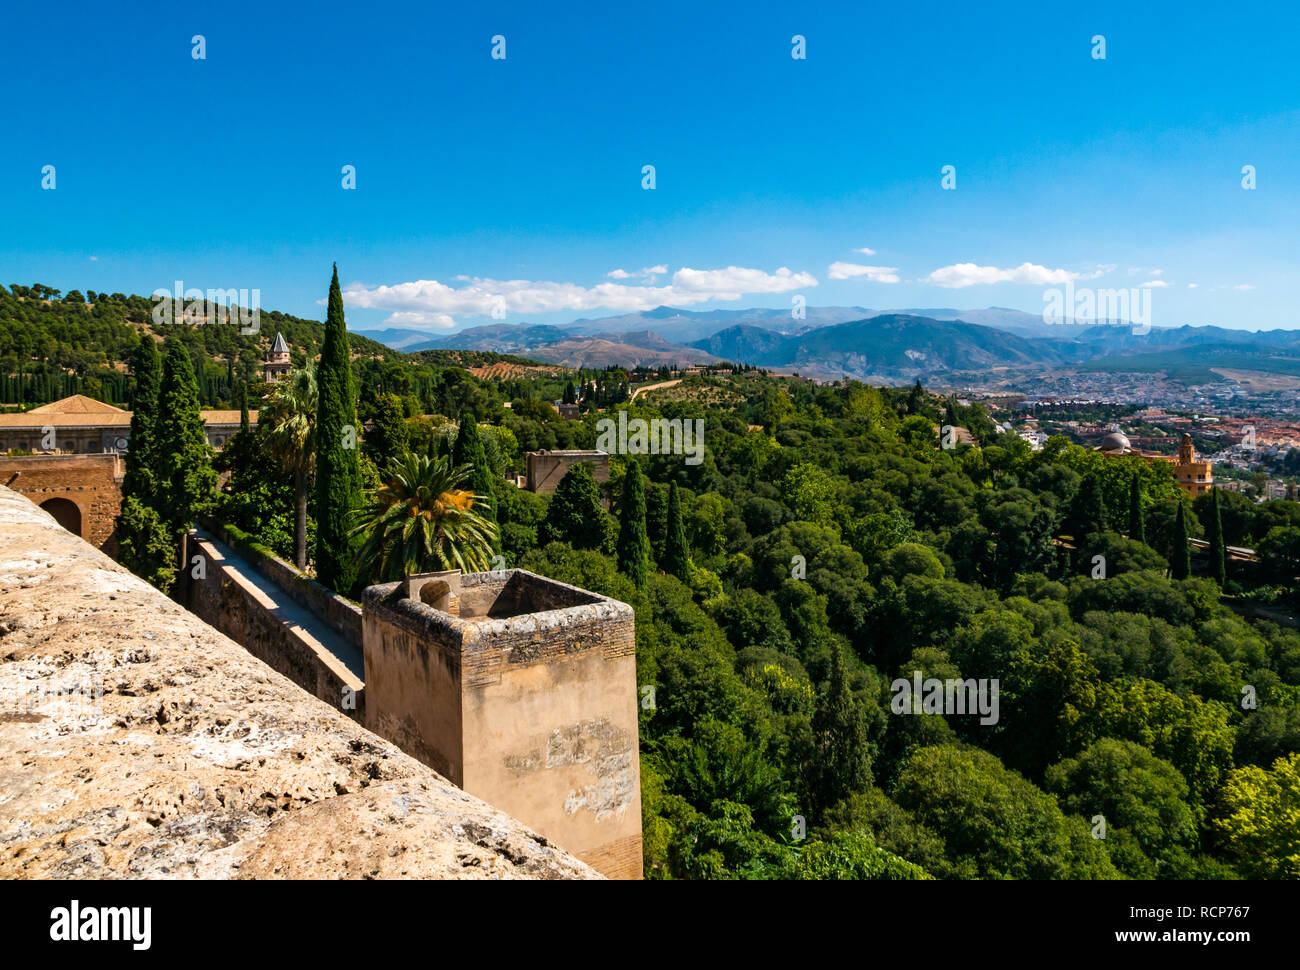 View of Justice Gate, Alcazaba, Alhambra Palace, Granada, Andalusia, Spain Stock Photo